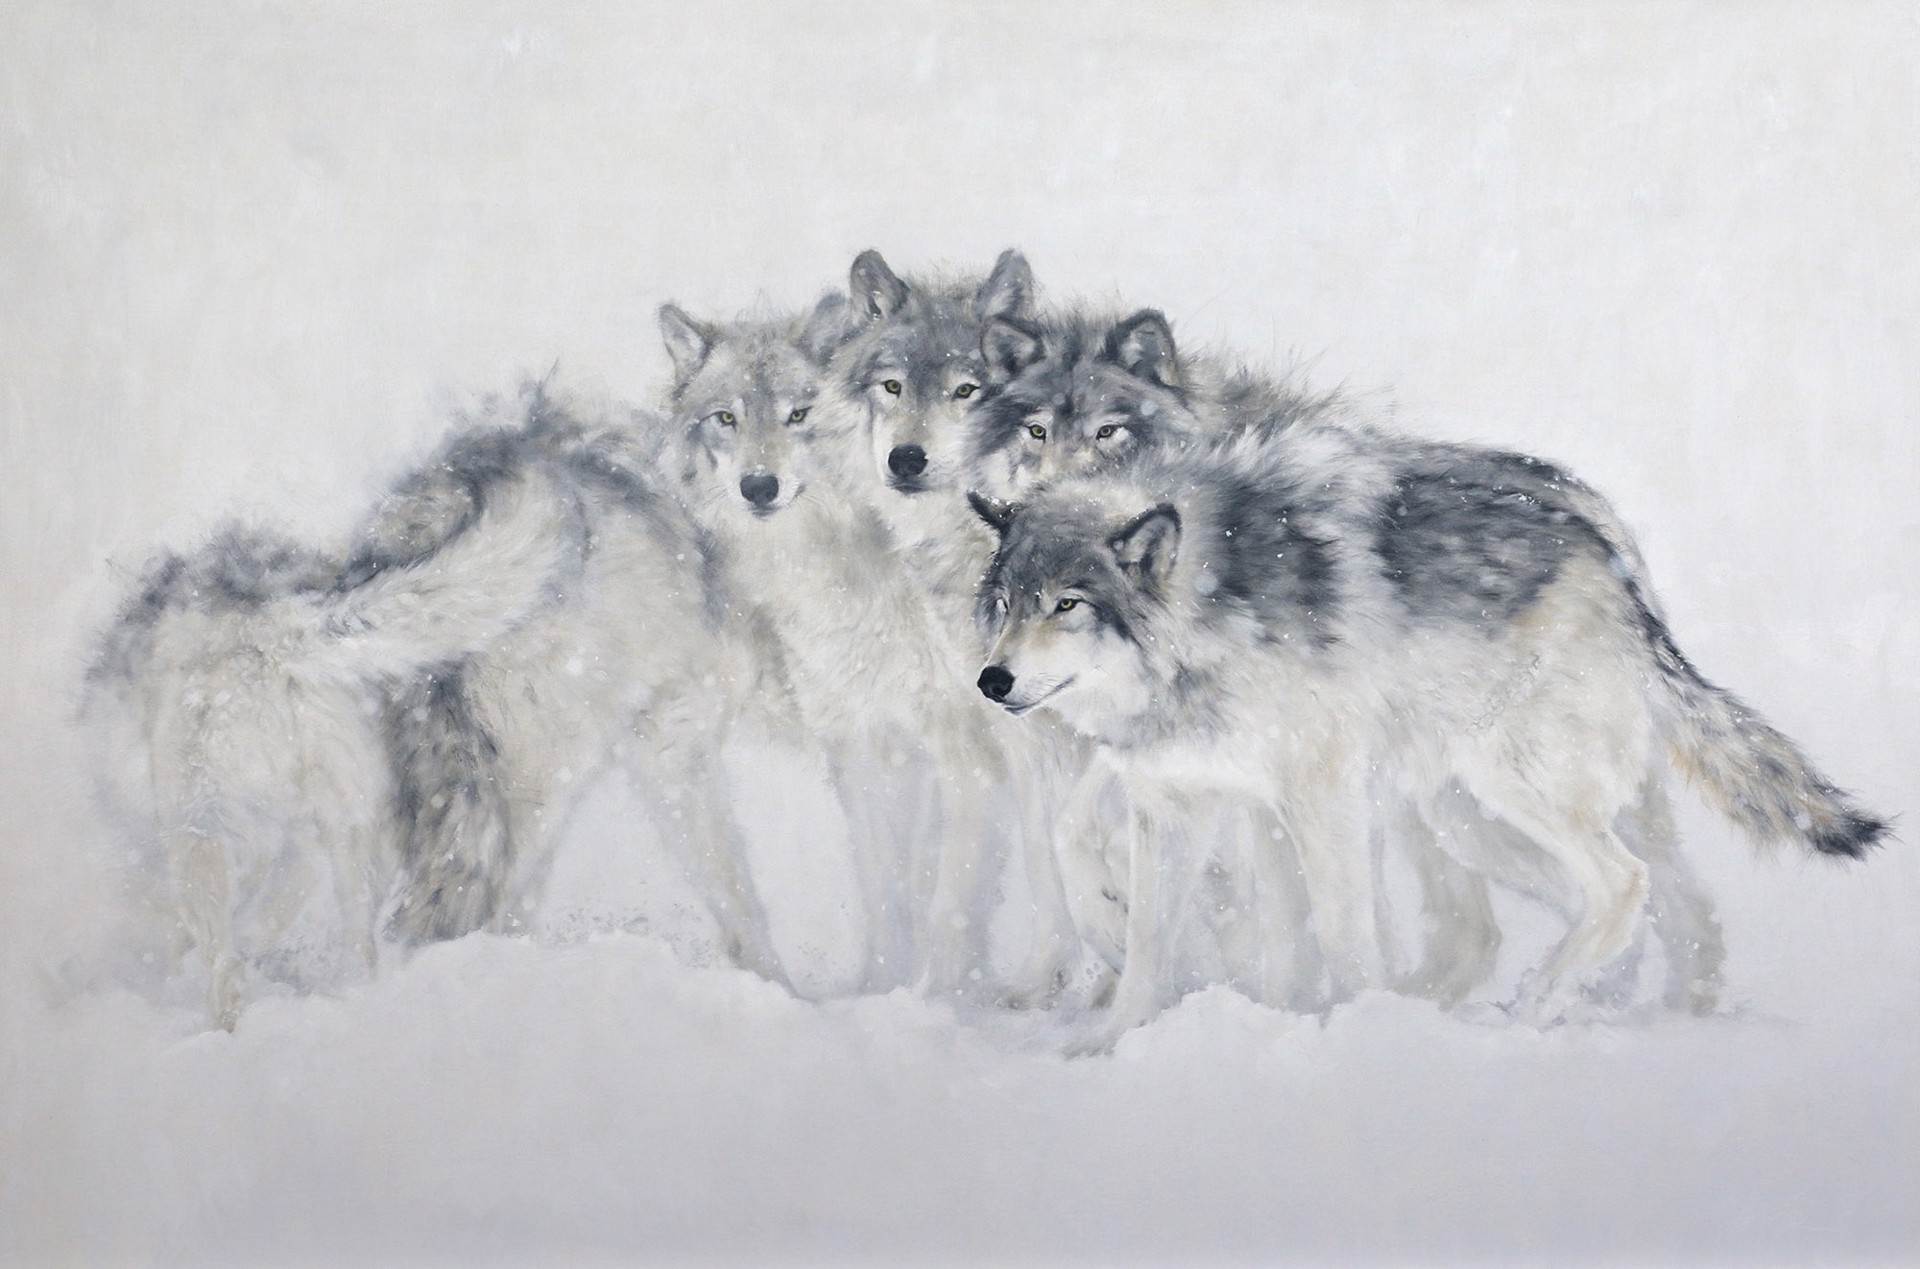 A Contemporary Black And White Painting Of A Pack Of Wolves In The Snow By Doyle Hostetler At Gallery Wild